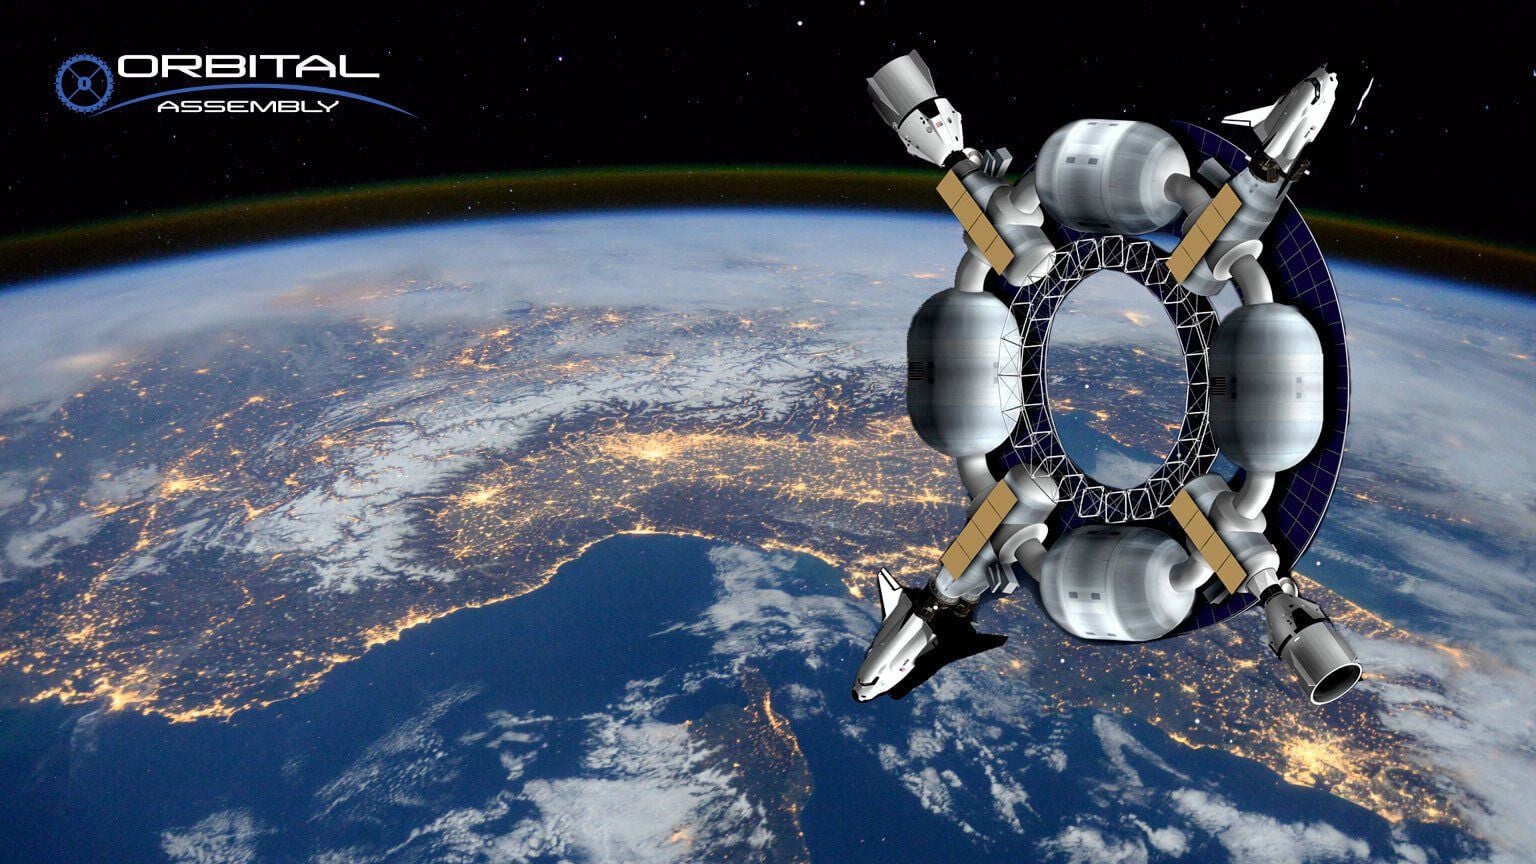 Rendering of the Pioneer Station luxury space hotel from Orbital Assembly.